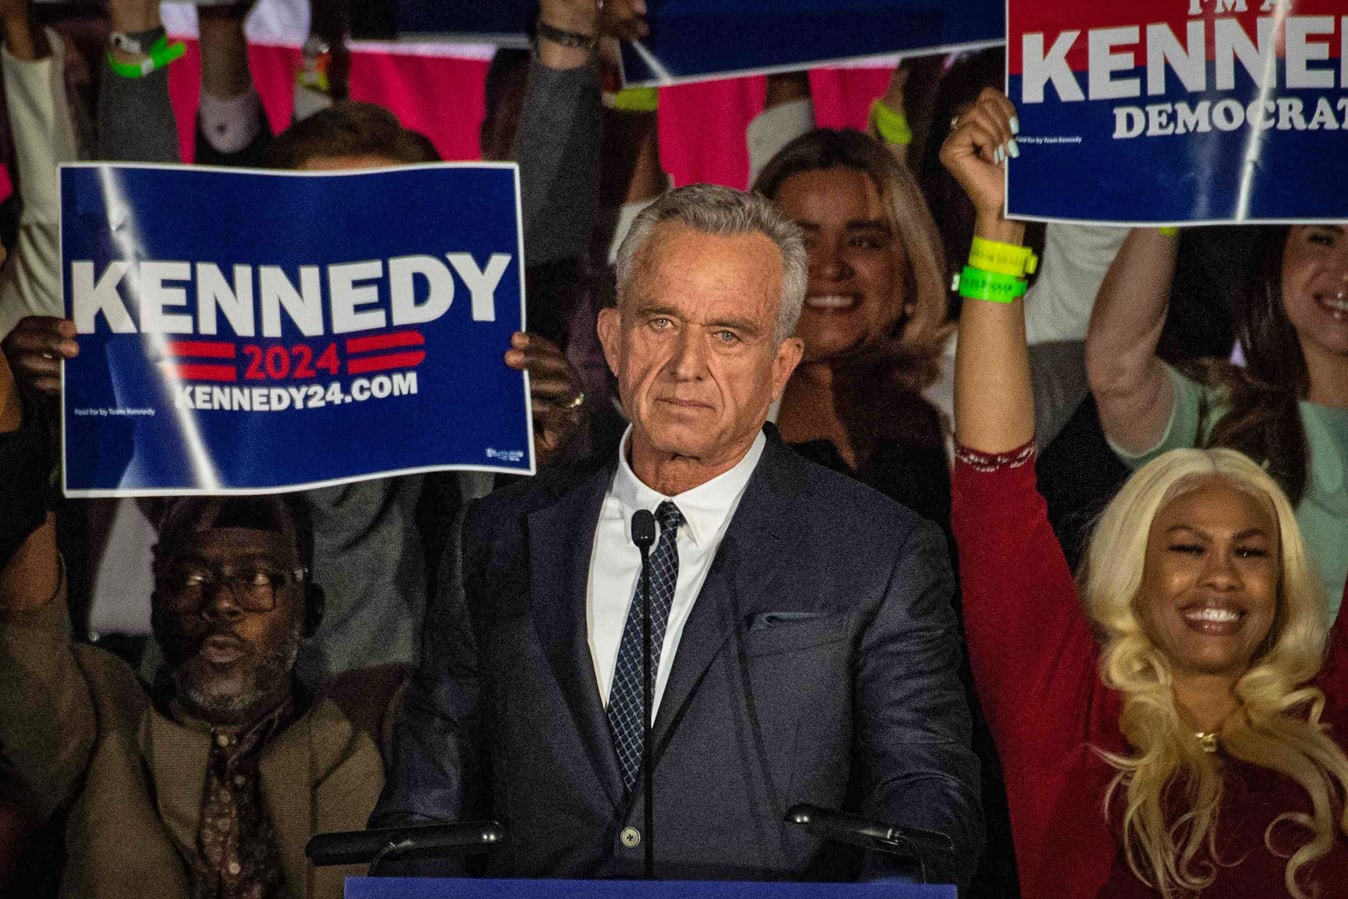 RFK Jr. not participating in far-right event after being listed as a speaker, aide says